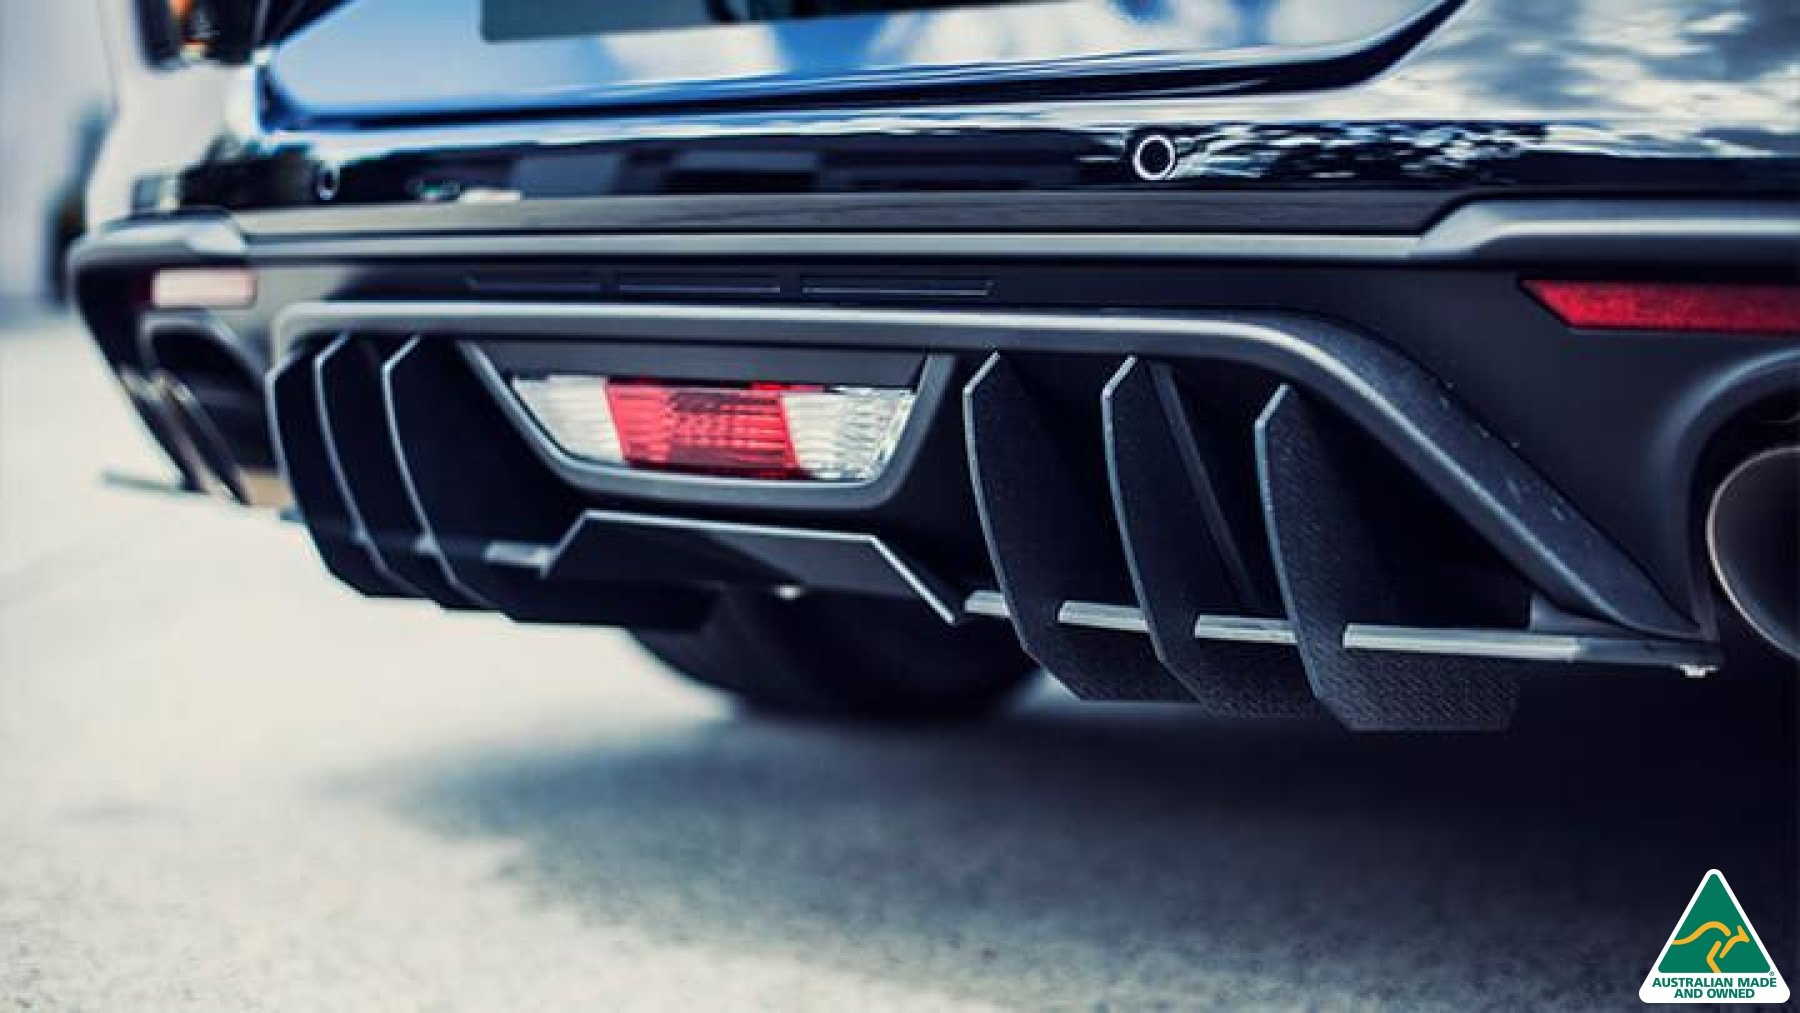 GT Mustang S550 FN Flow-Lock Rear Diffuser - MODE Auto Concepts